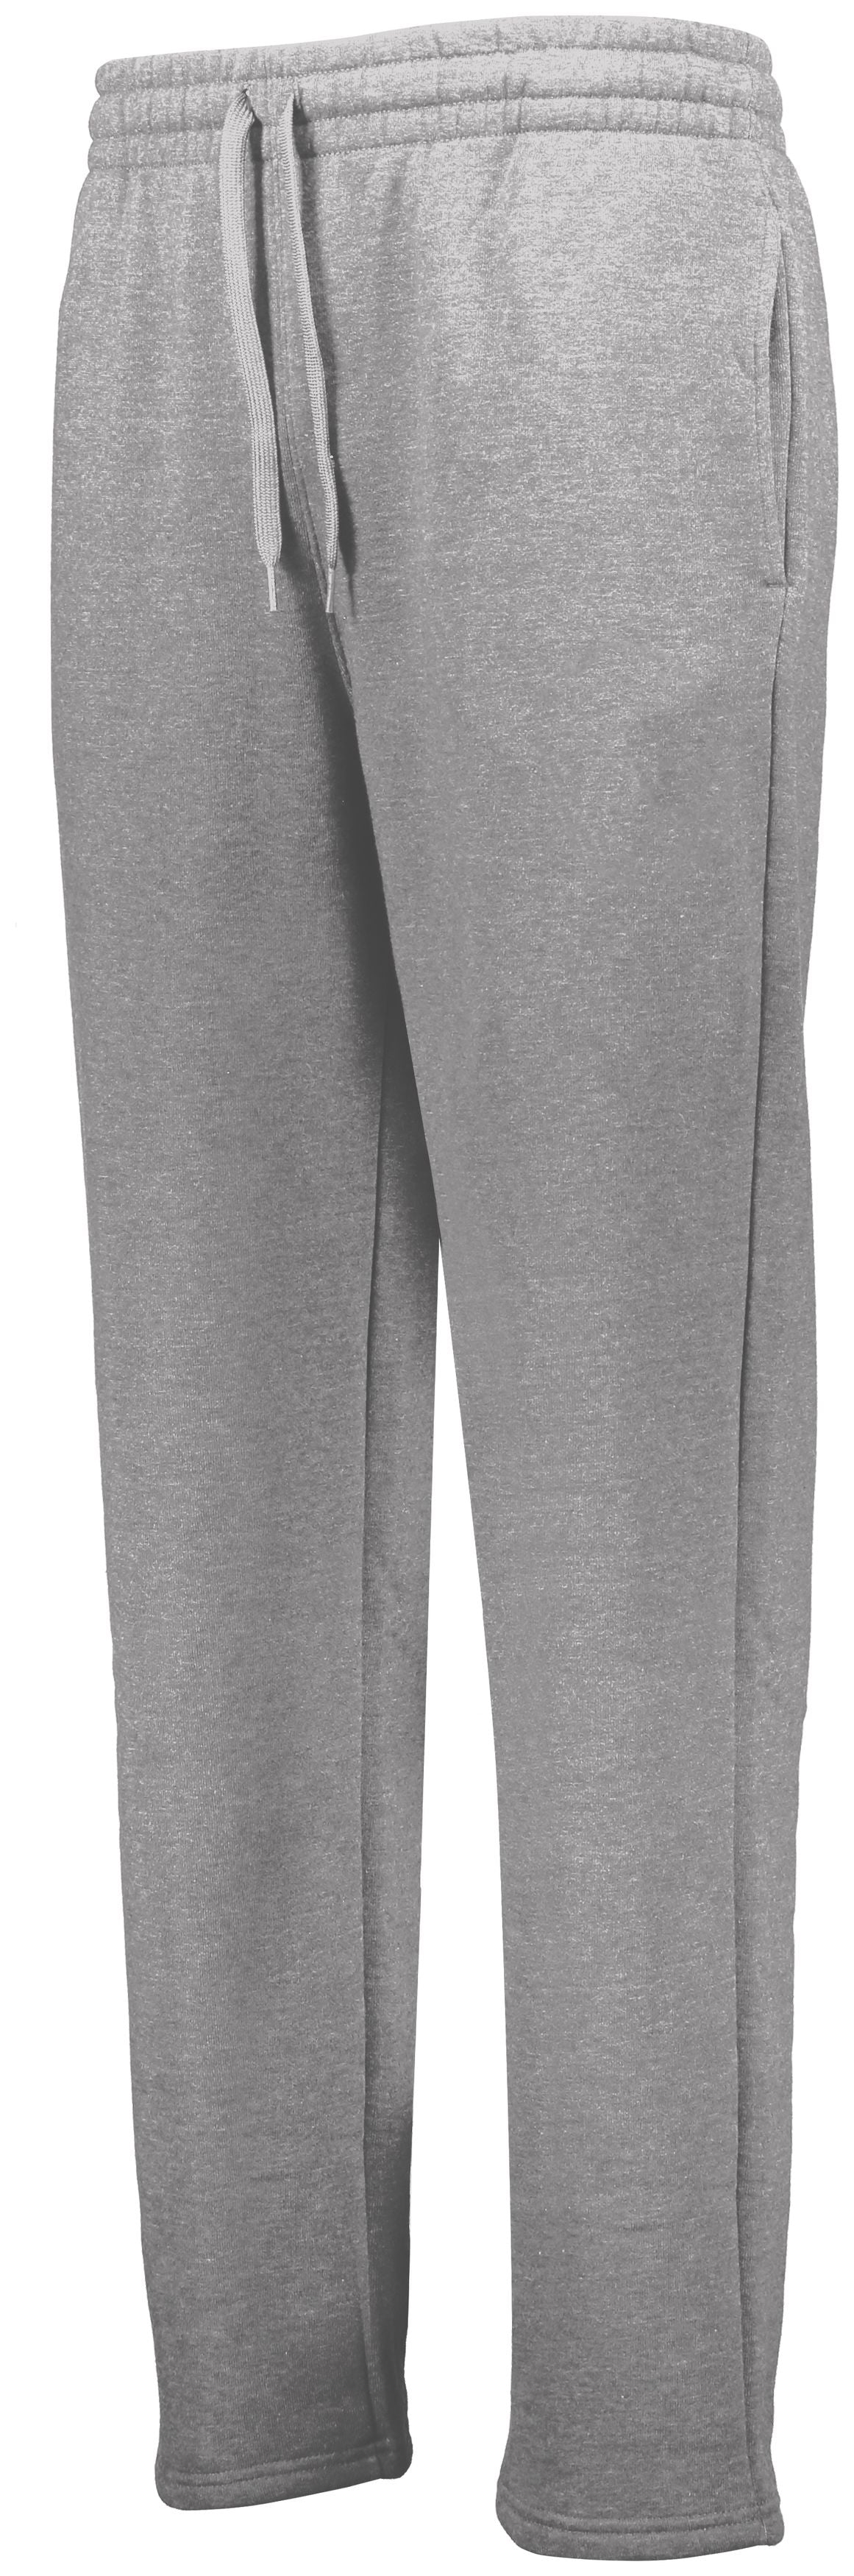 Russell Athletic 80/20 Open Bottom Sweatpant in Medium Grey Heather  -Part of the Adult, Adult-Pants, Pants, Russell-Athletic-Products product lines at KanaleyCreations.com